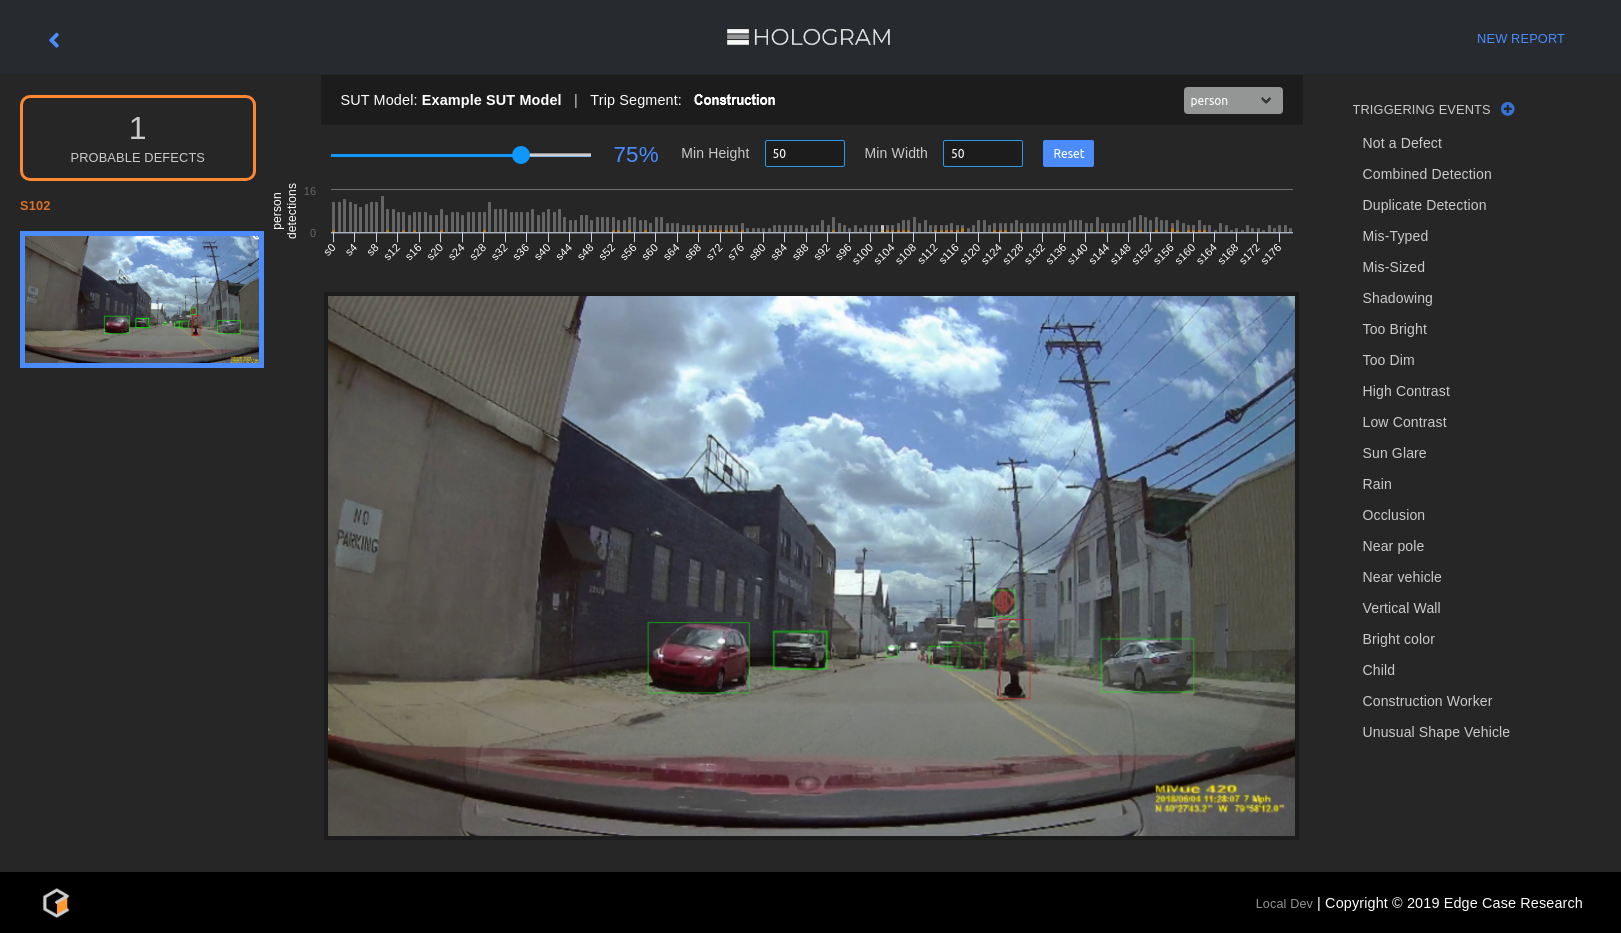 Edge Case Research's Hologram automatically finds scenarios in which autonomous vehicles fail to detect pedestrians, vehicles, and other important road users. This image shows an example of the kinds of scenarios that Hologram might show a user. The continuous risk analysis platform helps vehicle developers learn about safety hazards before accidents happen.
